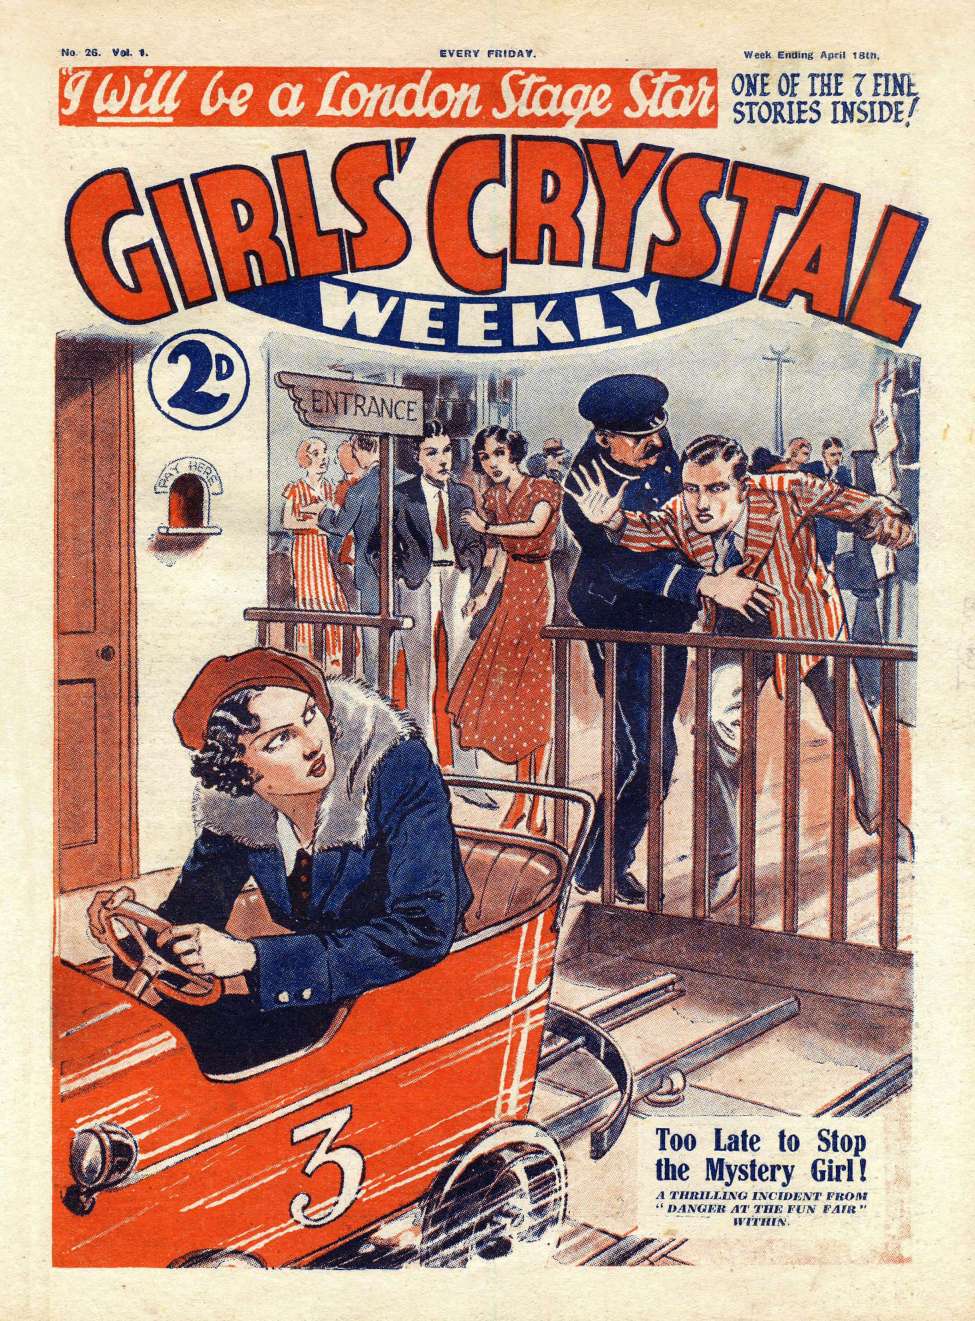 Comic Book Cover For Girls' Crystal 26 - Too Late to Stop the Mystery Girl!